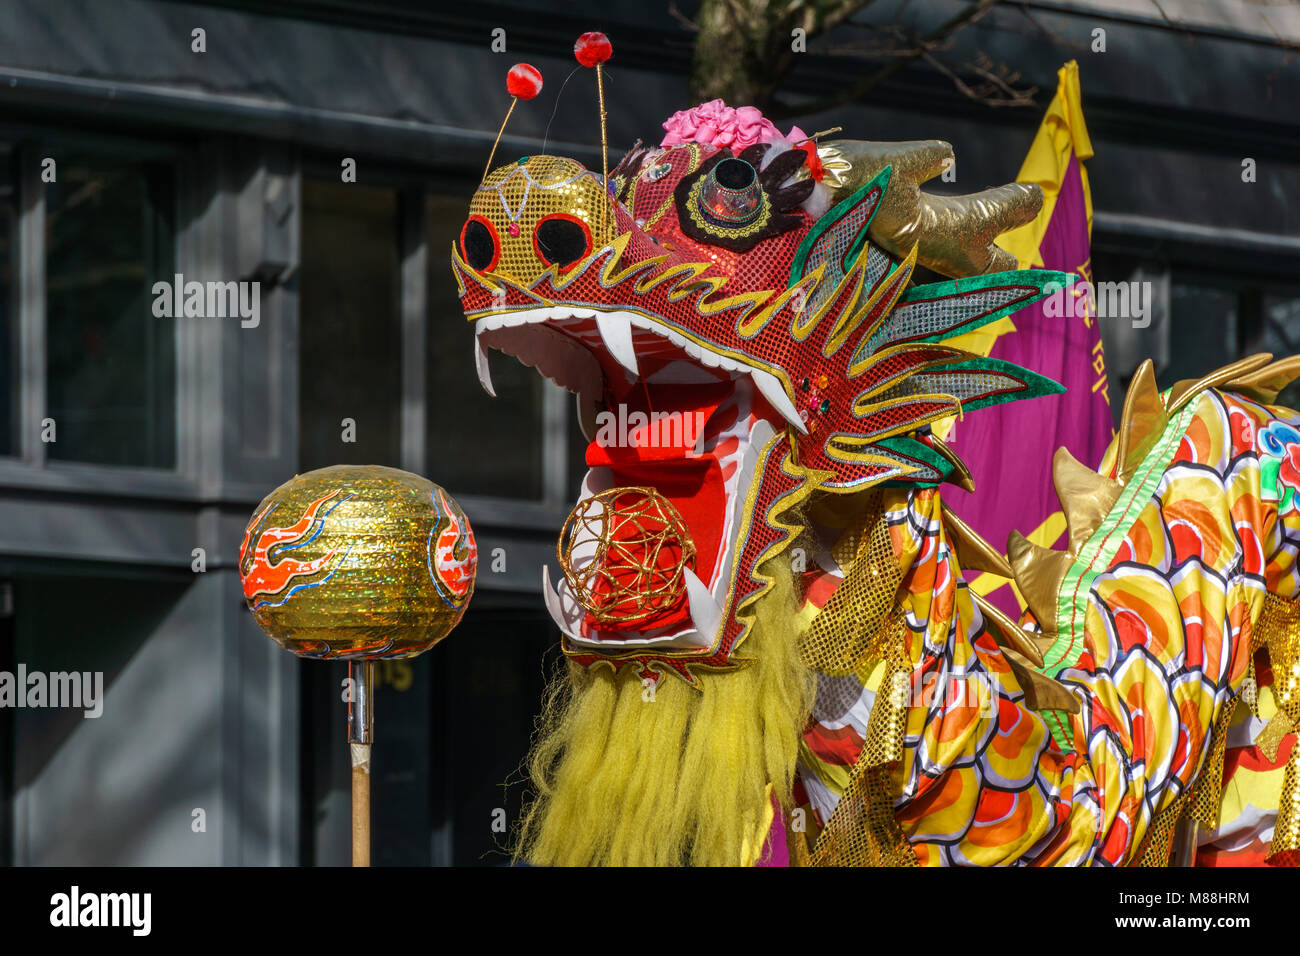 VANCOUVER, CANADA - February 18, 2018: People playing dragon dance for Chinese New Year in Chinatown. Stock Photo